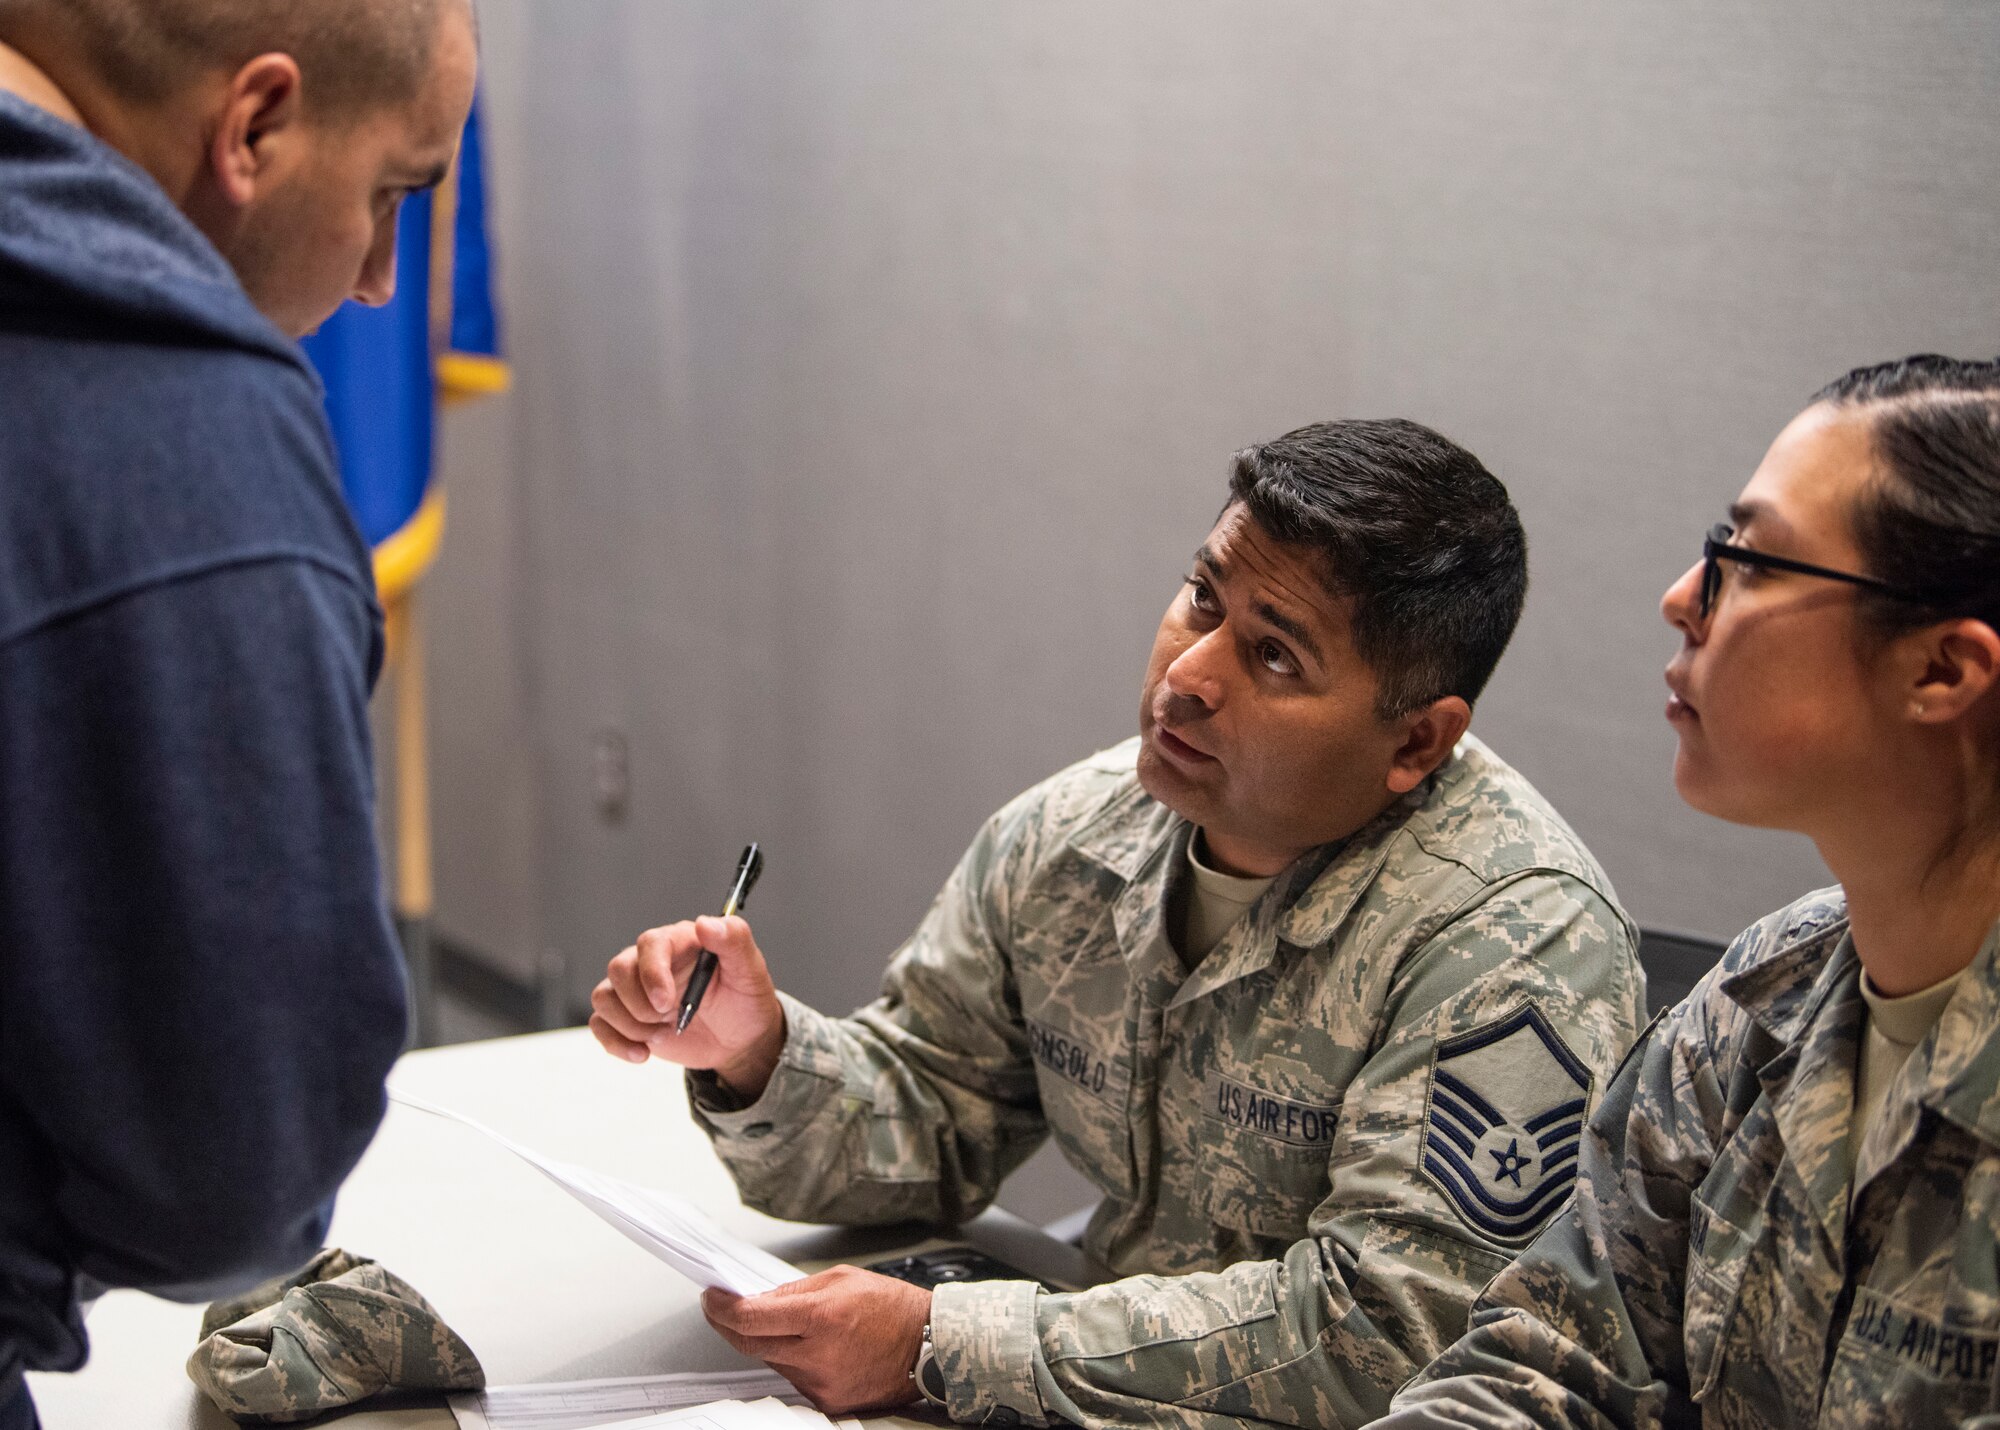 Master Sgt. Demetrios Consolo, 310th Aerospace Medicine Flight, assists an Individual Ready Reserve member with his medical records during an IRR muster at Peterson Air Force Base, Aug. 17, 2018.